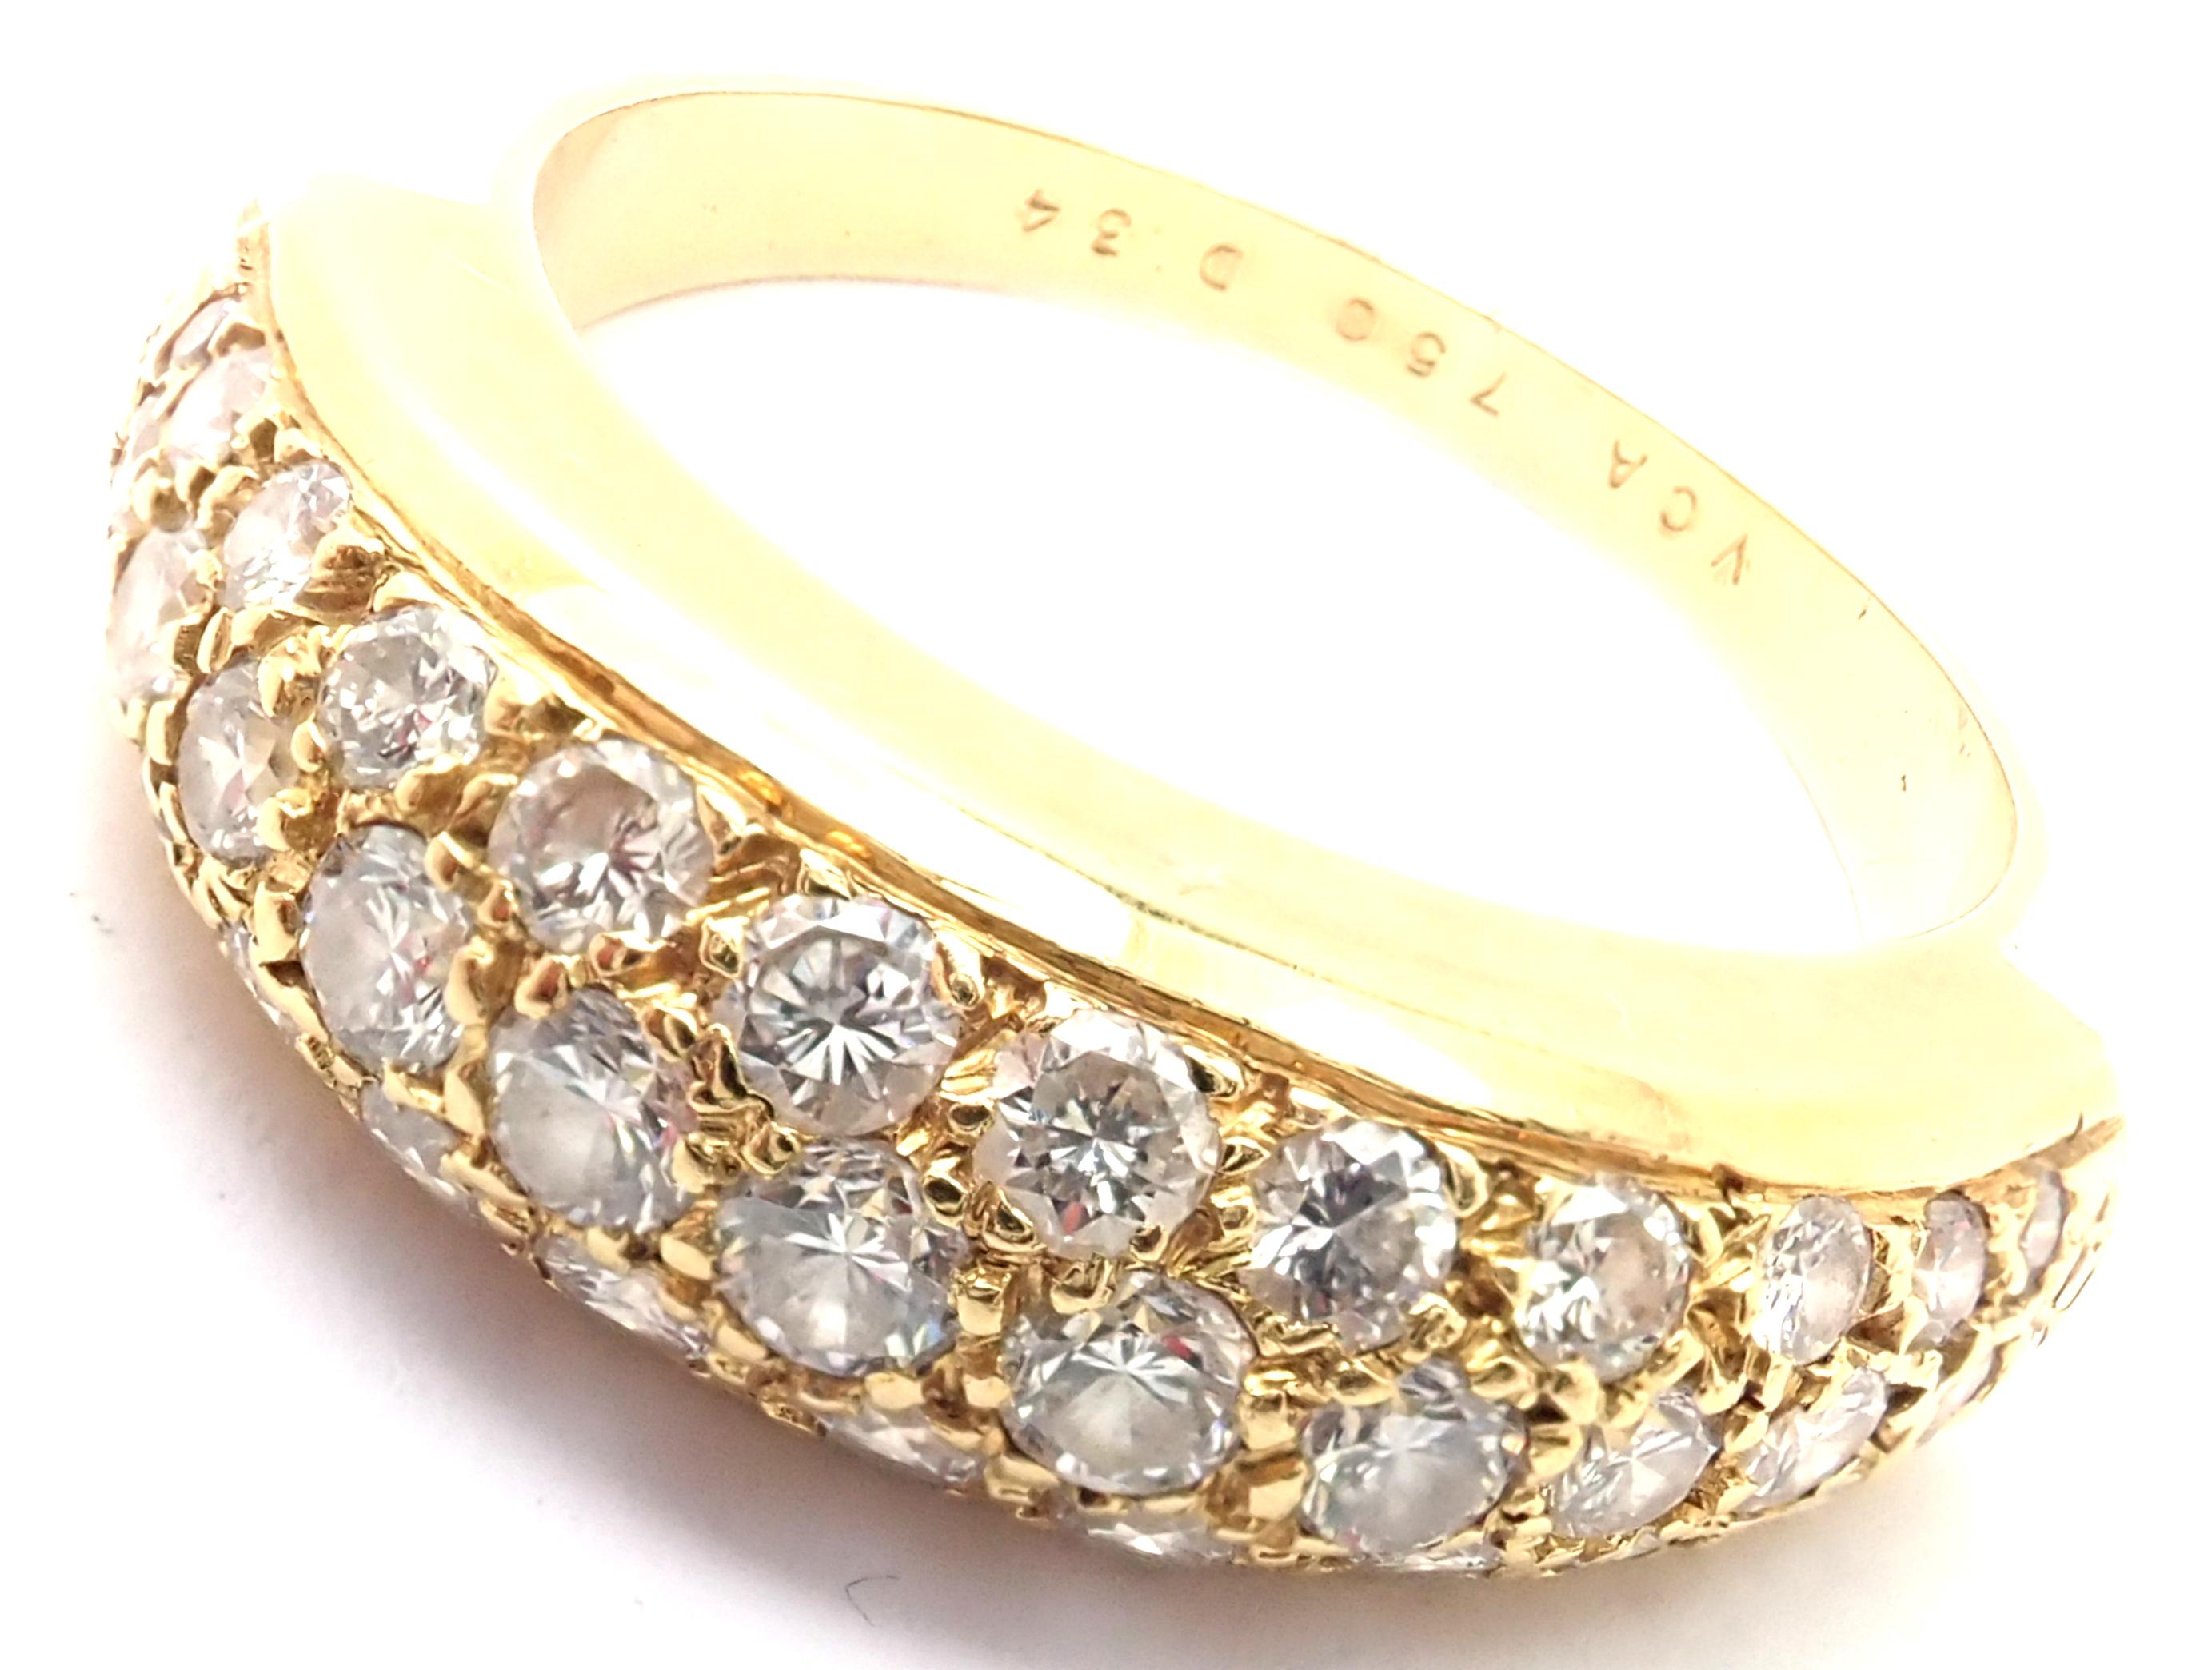 18k Yellow Gold Diamond Band Ring by Van Cleef & Arpels.
With 35 Round Brilliant cut diamonds VS1 clarity, G color total weight approximately 1ct
Details: 
Size: 6 3/4
Width: 7mm
Weight: 5.3 grams
Stamped Hallmarks: VCA 750 D34
*Free Shipping within